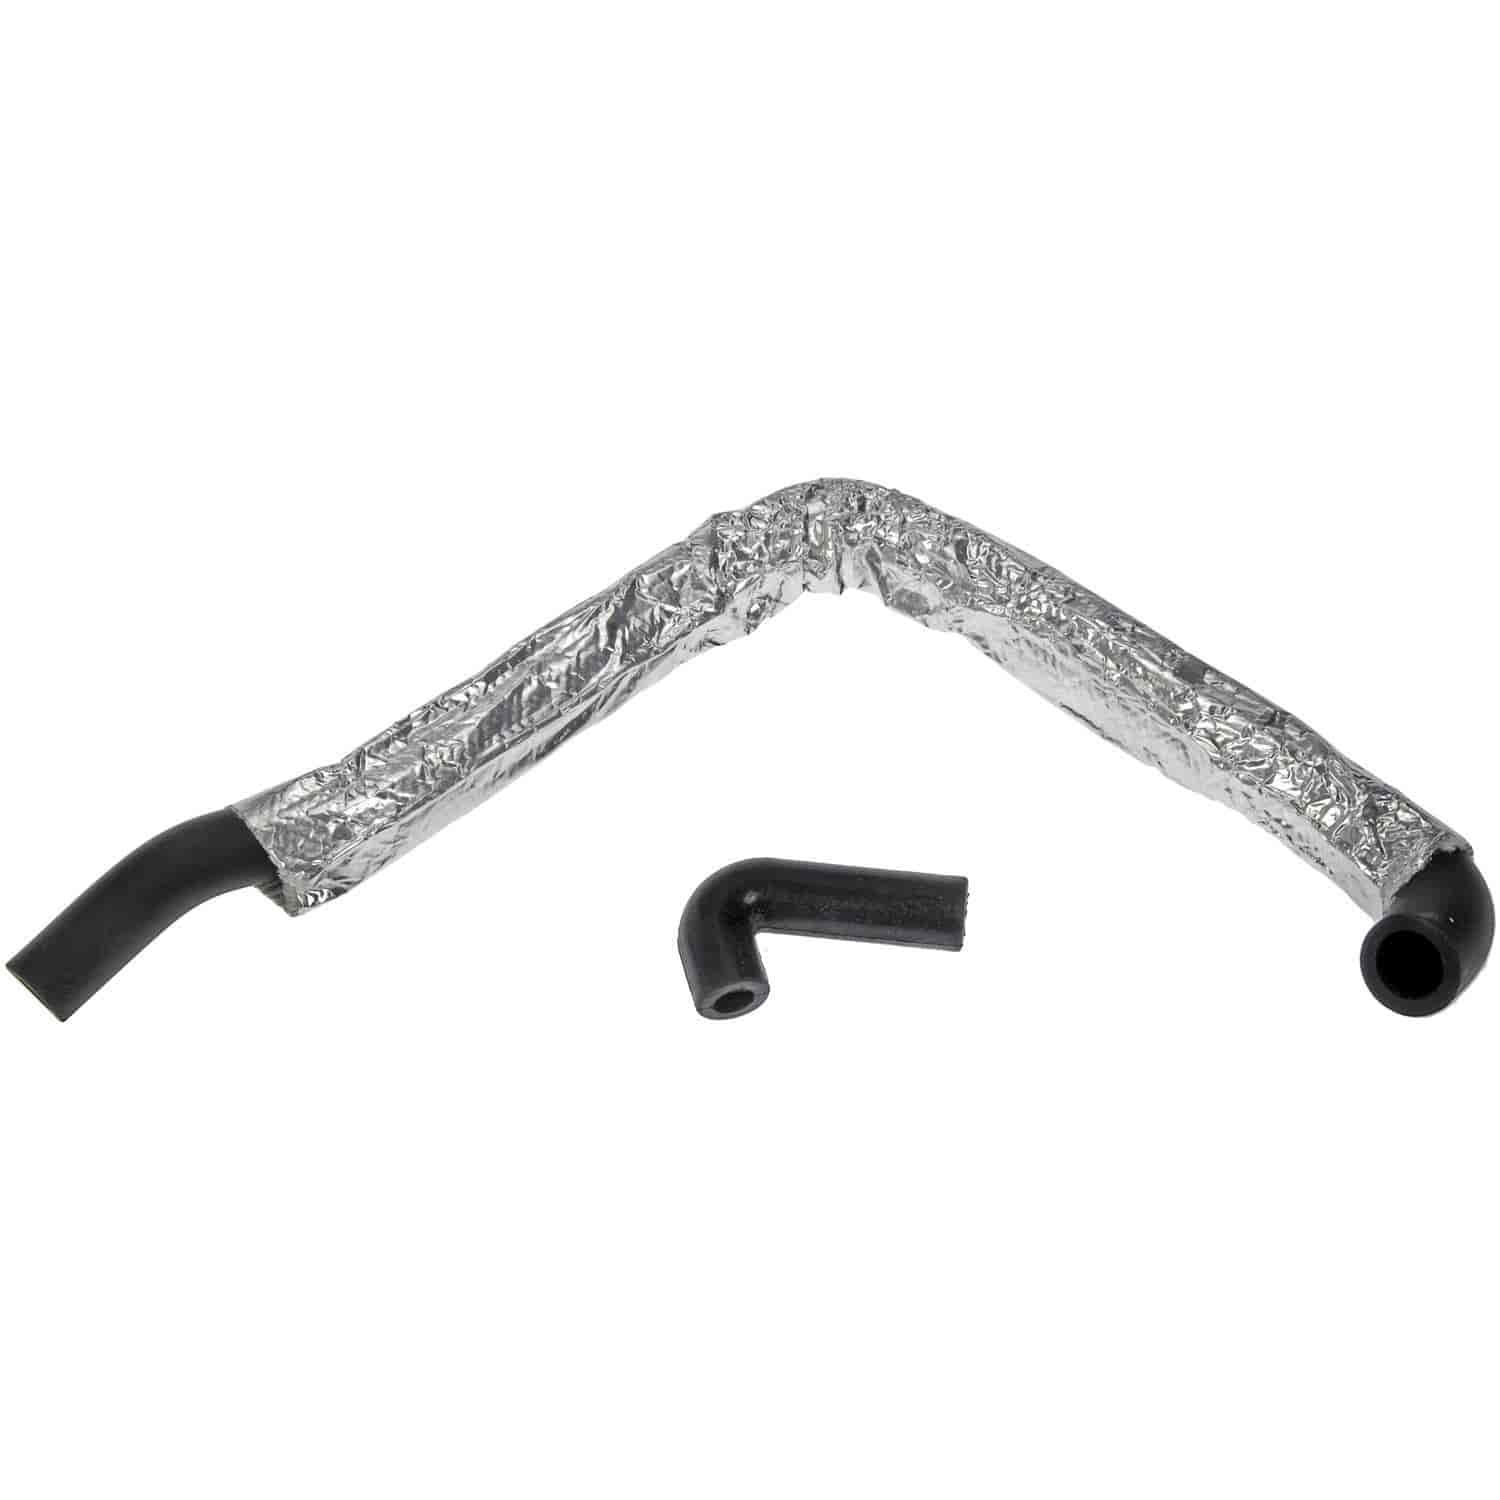 Dorman Products 46030: Emissions Hose and Elbow JEGS